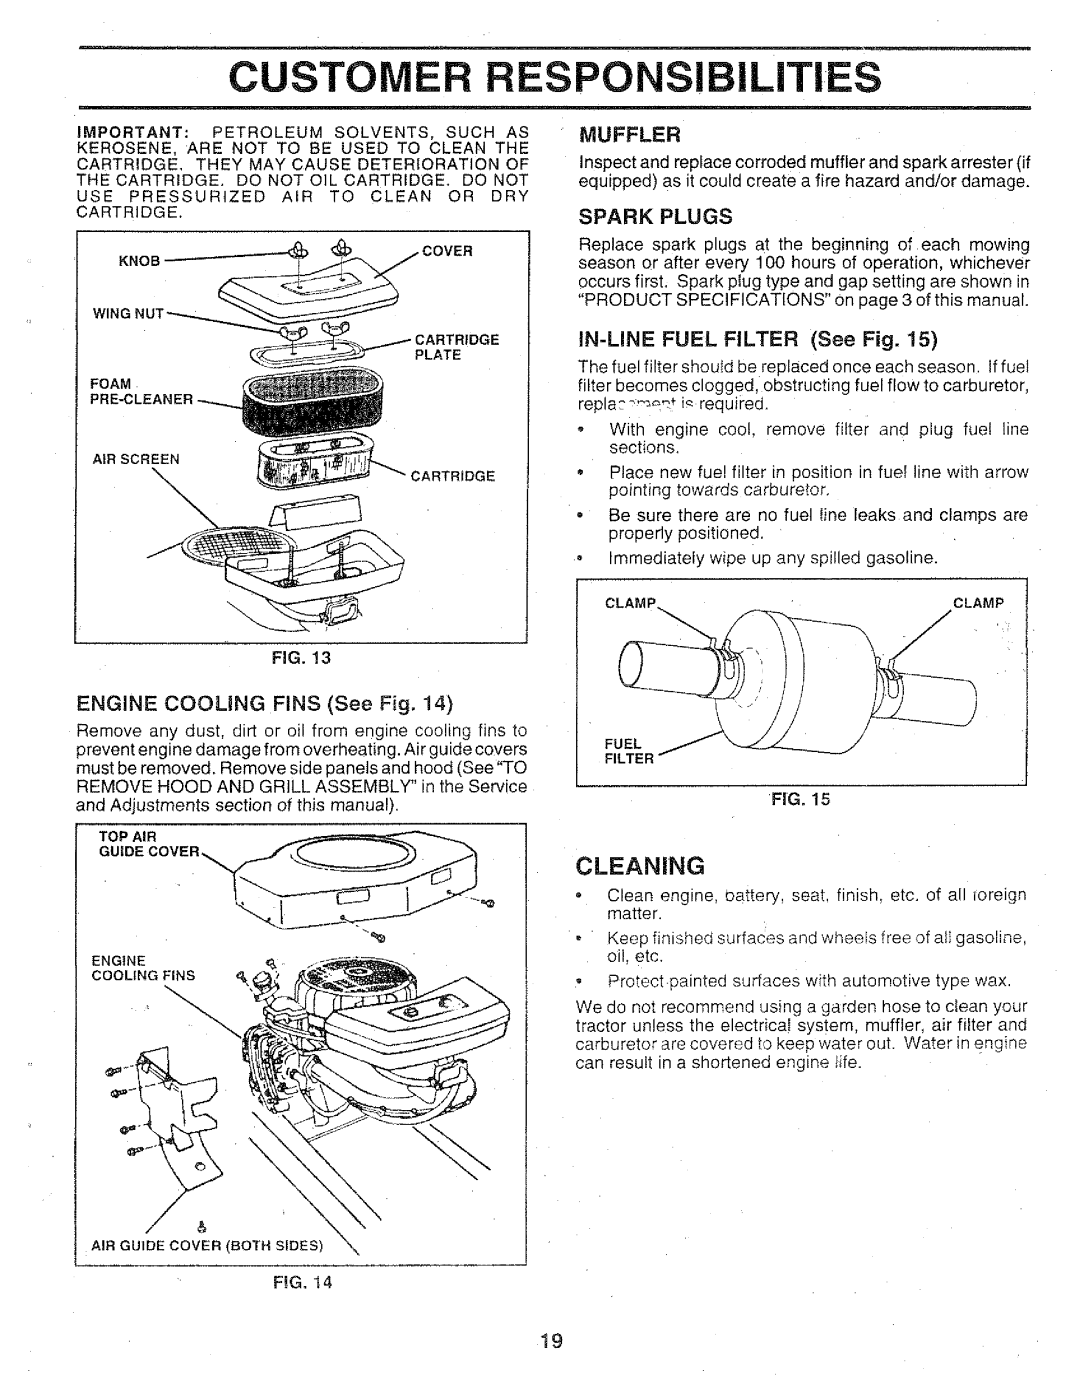 Sears 917.25147 owner manual Cleaning, Sparkplugs, IN-LINE FUEL FILTER See Fig, Customer Responsibilities 